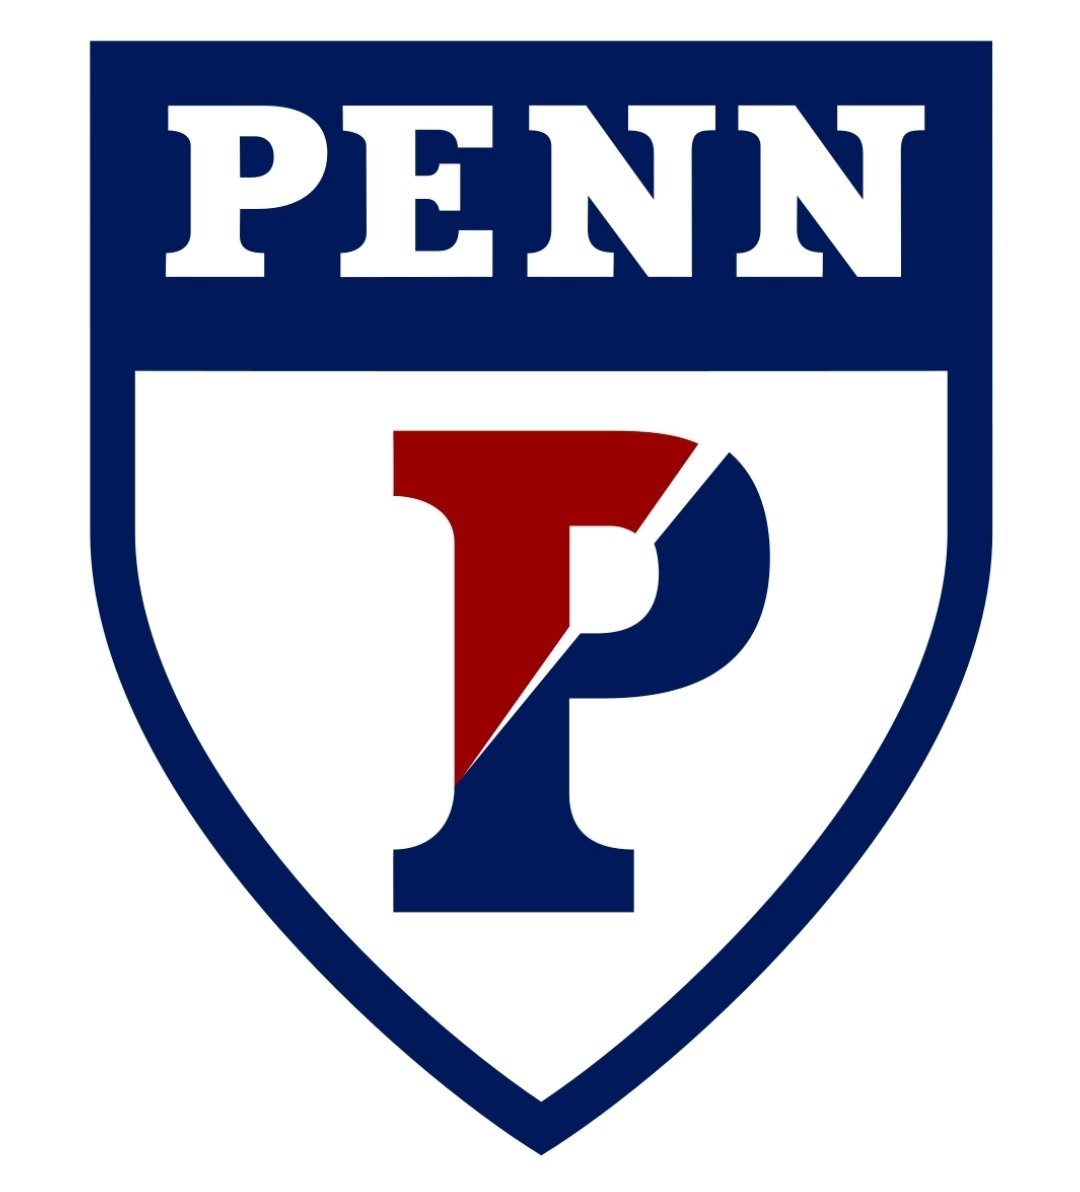 After a great conversation with @coach_ru this morning, I am honored to announce that I have received an offer from the prestigious @UniversityofPenn and the @pennfb staff #fightonpenn @Throw_2_Win @InglewoodSports @QBUNIVERSEQBU #QB10 #ilovethisgame